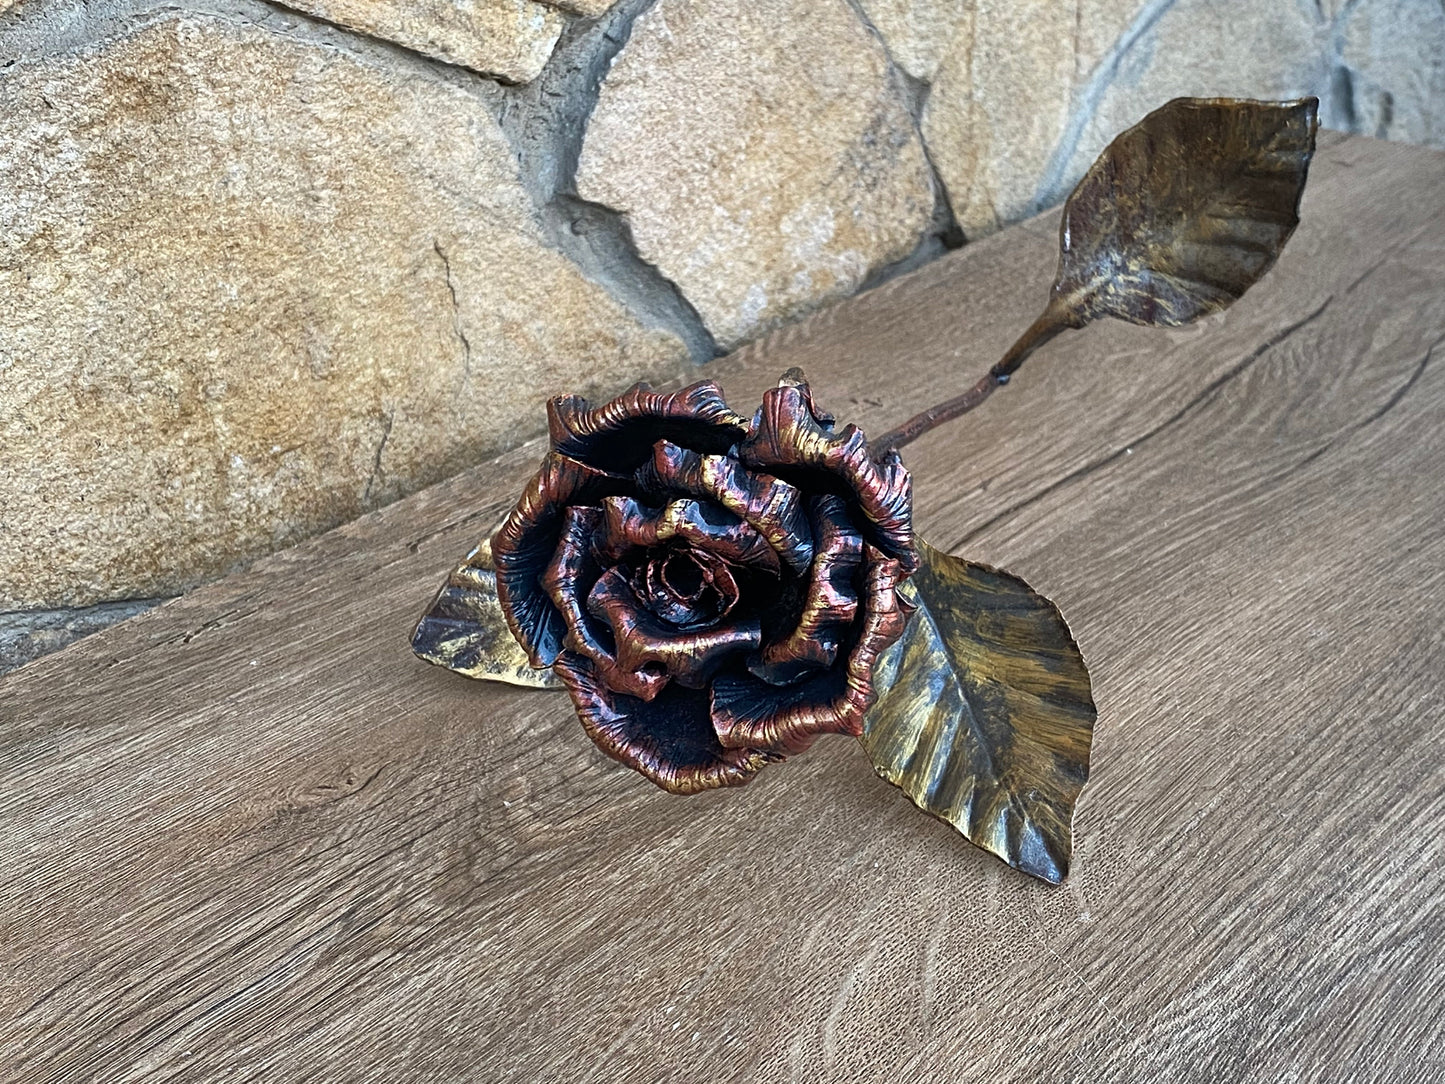 6th anniversary gift, iron anniversary, metal rose, hand forged rose, metal sculpture, iron rose, metal roses, steel rose, iron gift for her